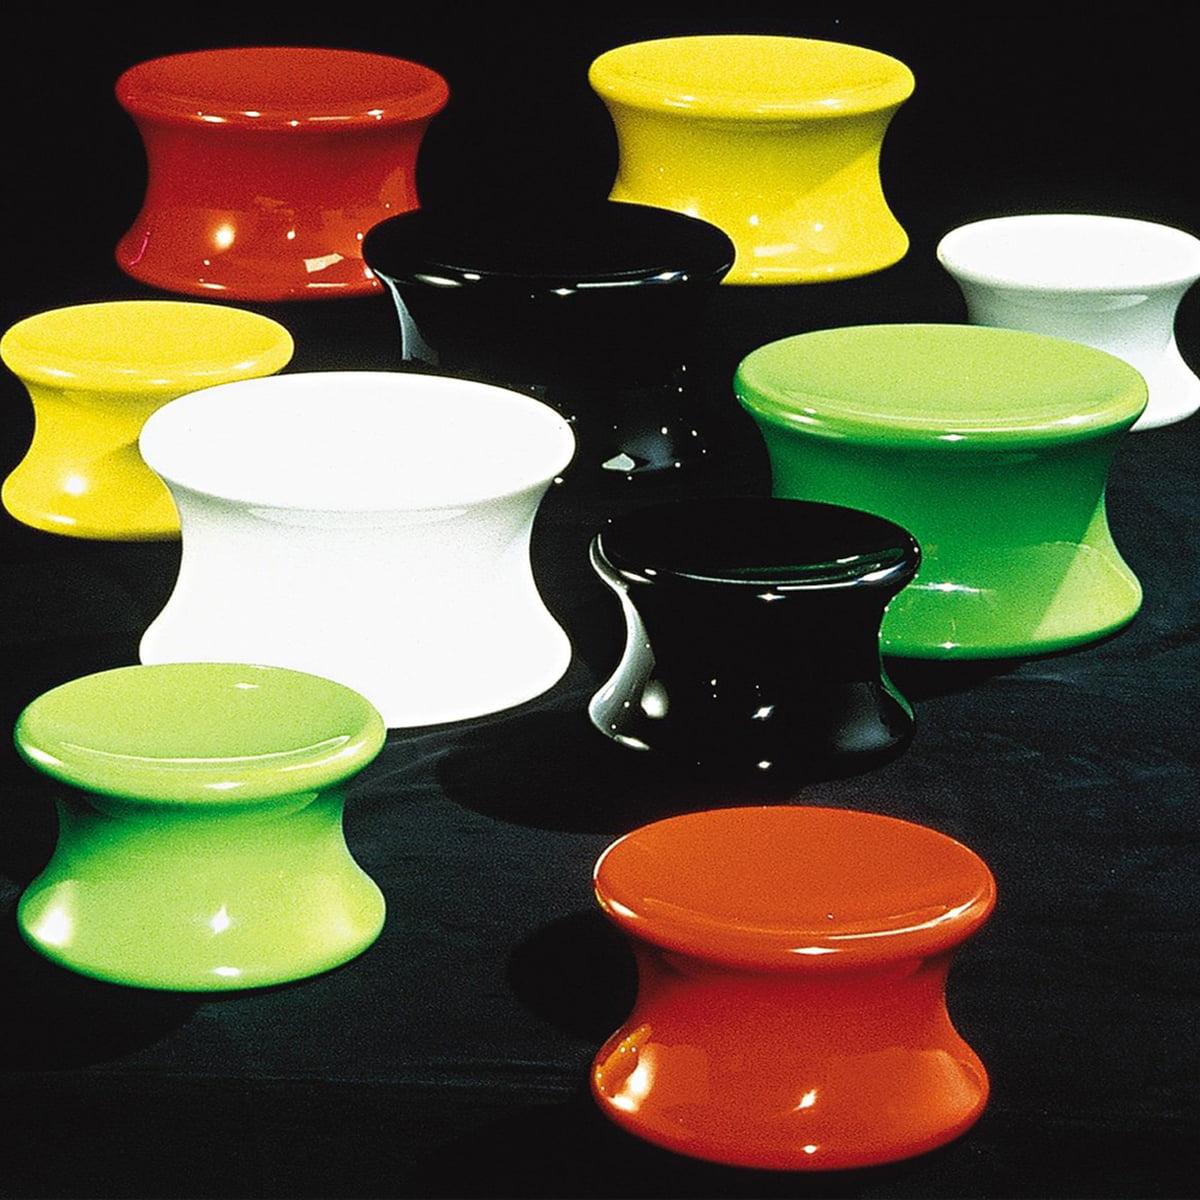 Mushroom is one of Eero’s oldest designs and in its fibreglass form is part of the same design family that includes the Ball Chair, Pastil and Tomato. It can be used as a stool or a small table. The fibreglass mushroom was designed in 1967 by Eero